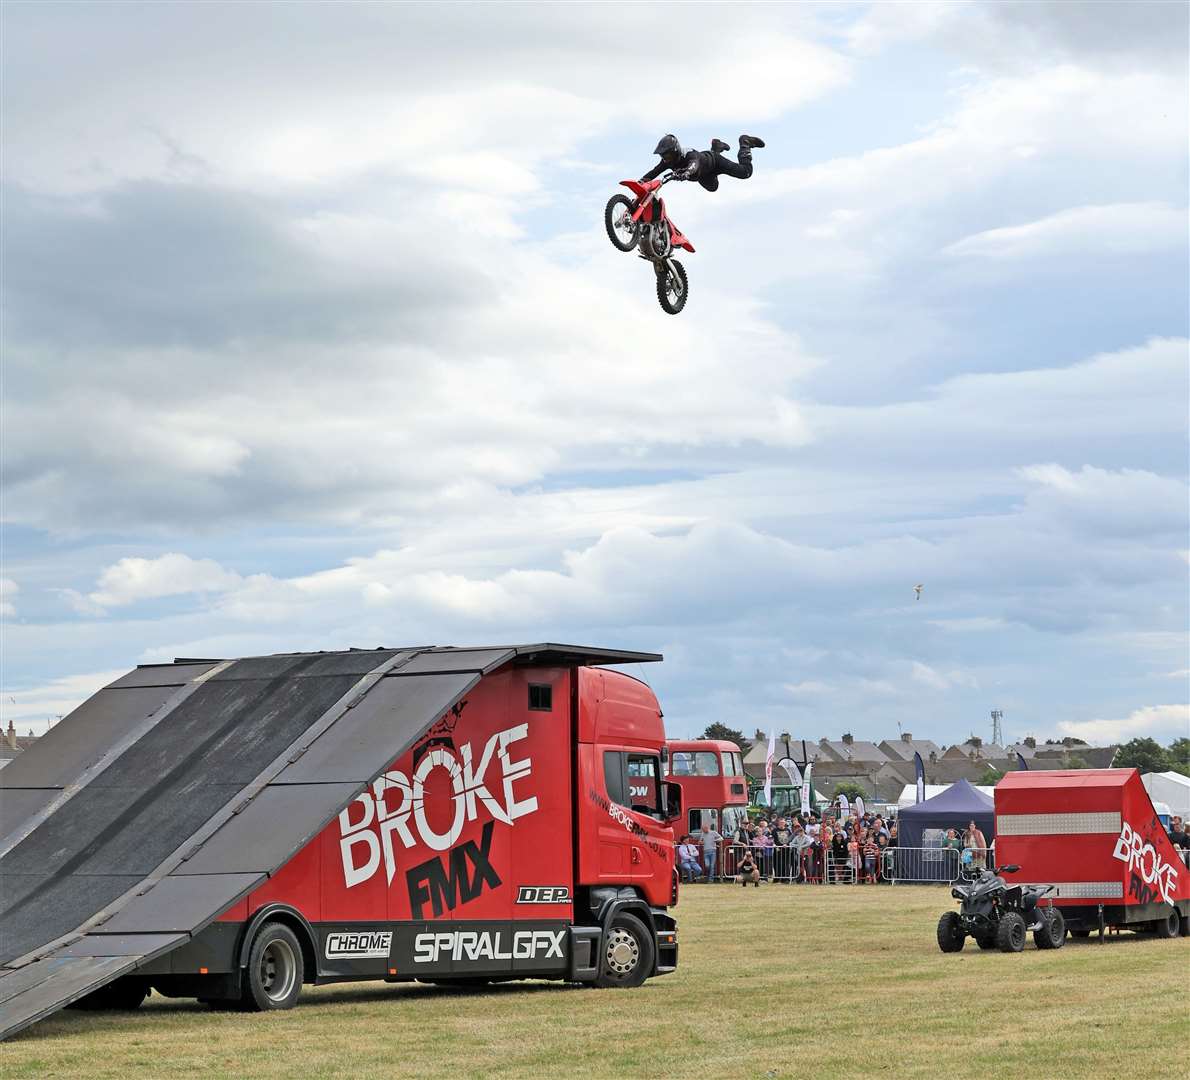 John Pearson shows the acrobatic style of Broke FMX. Picture: James Gunn